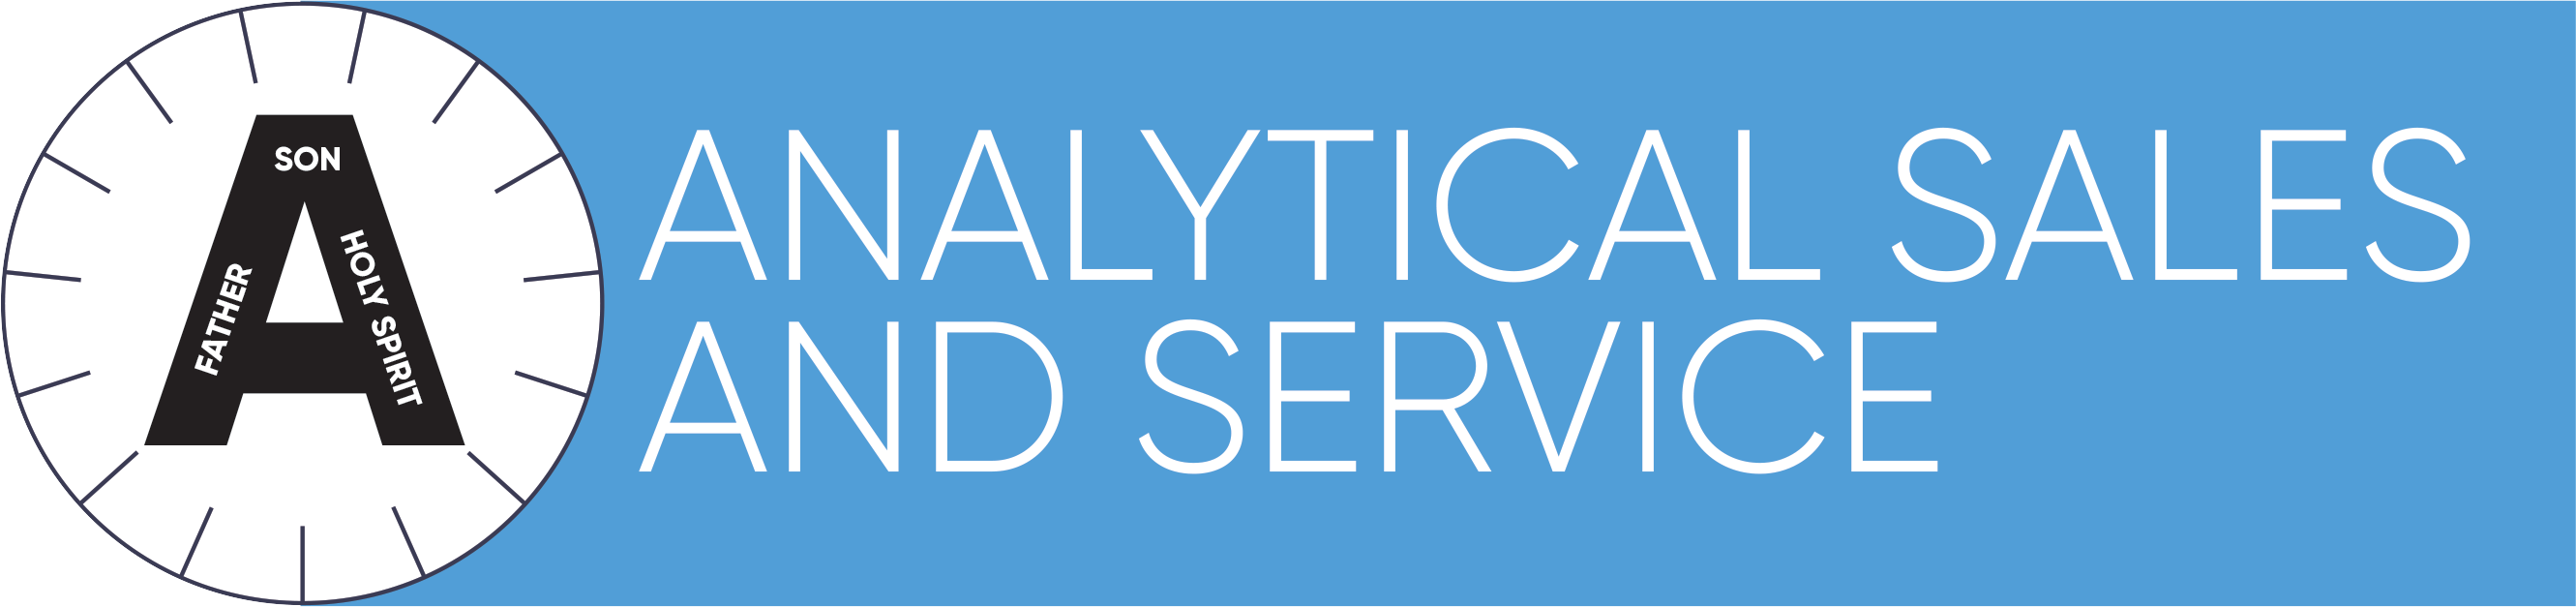 Analytical Sales & Services